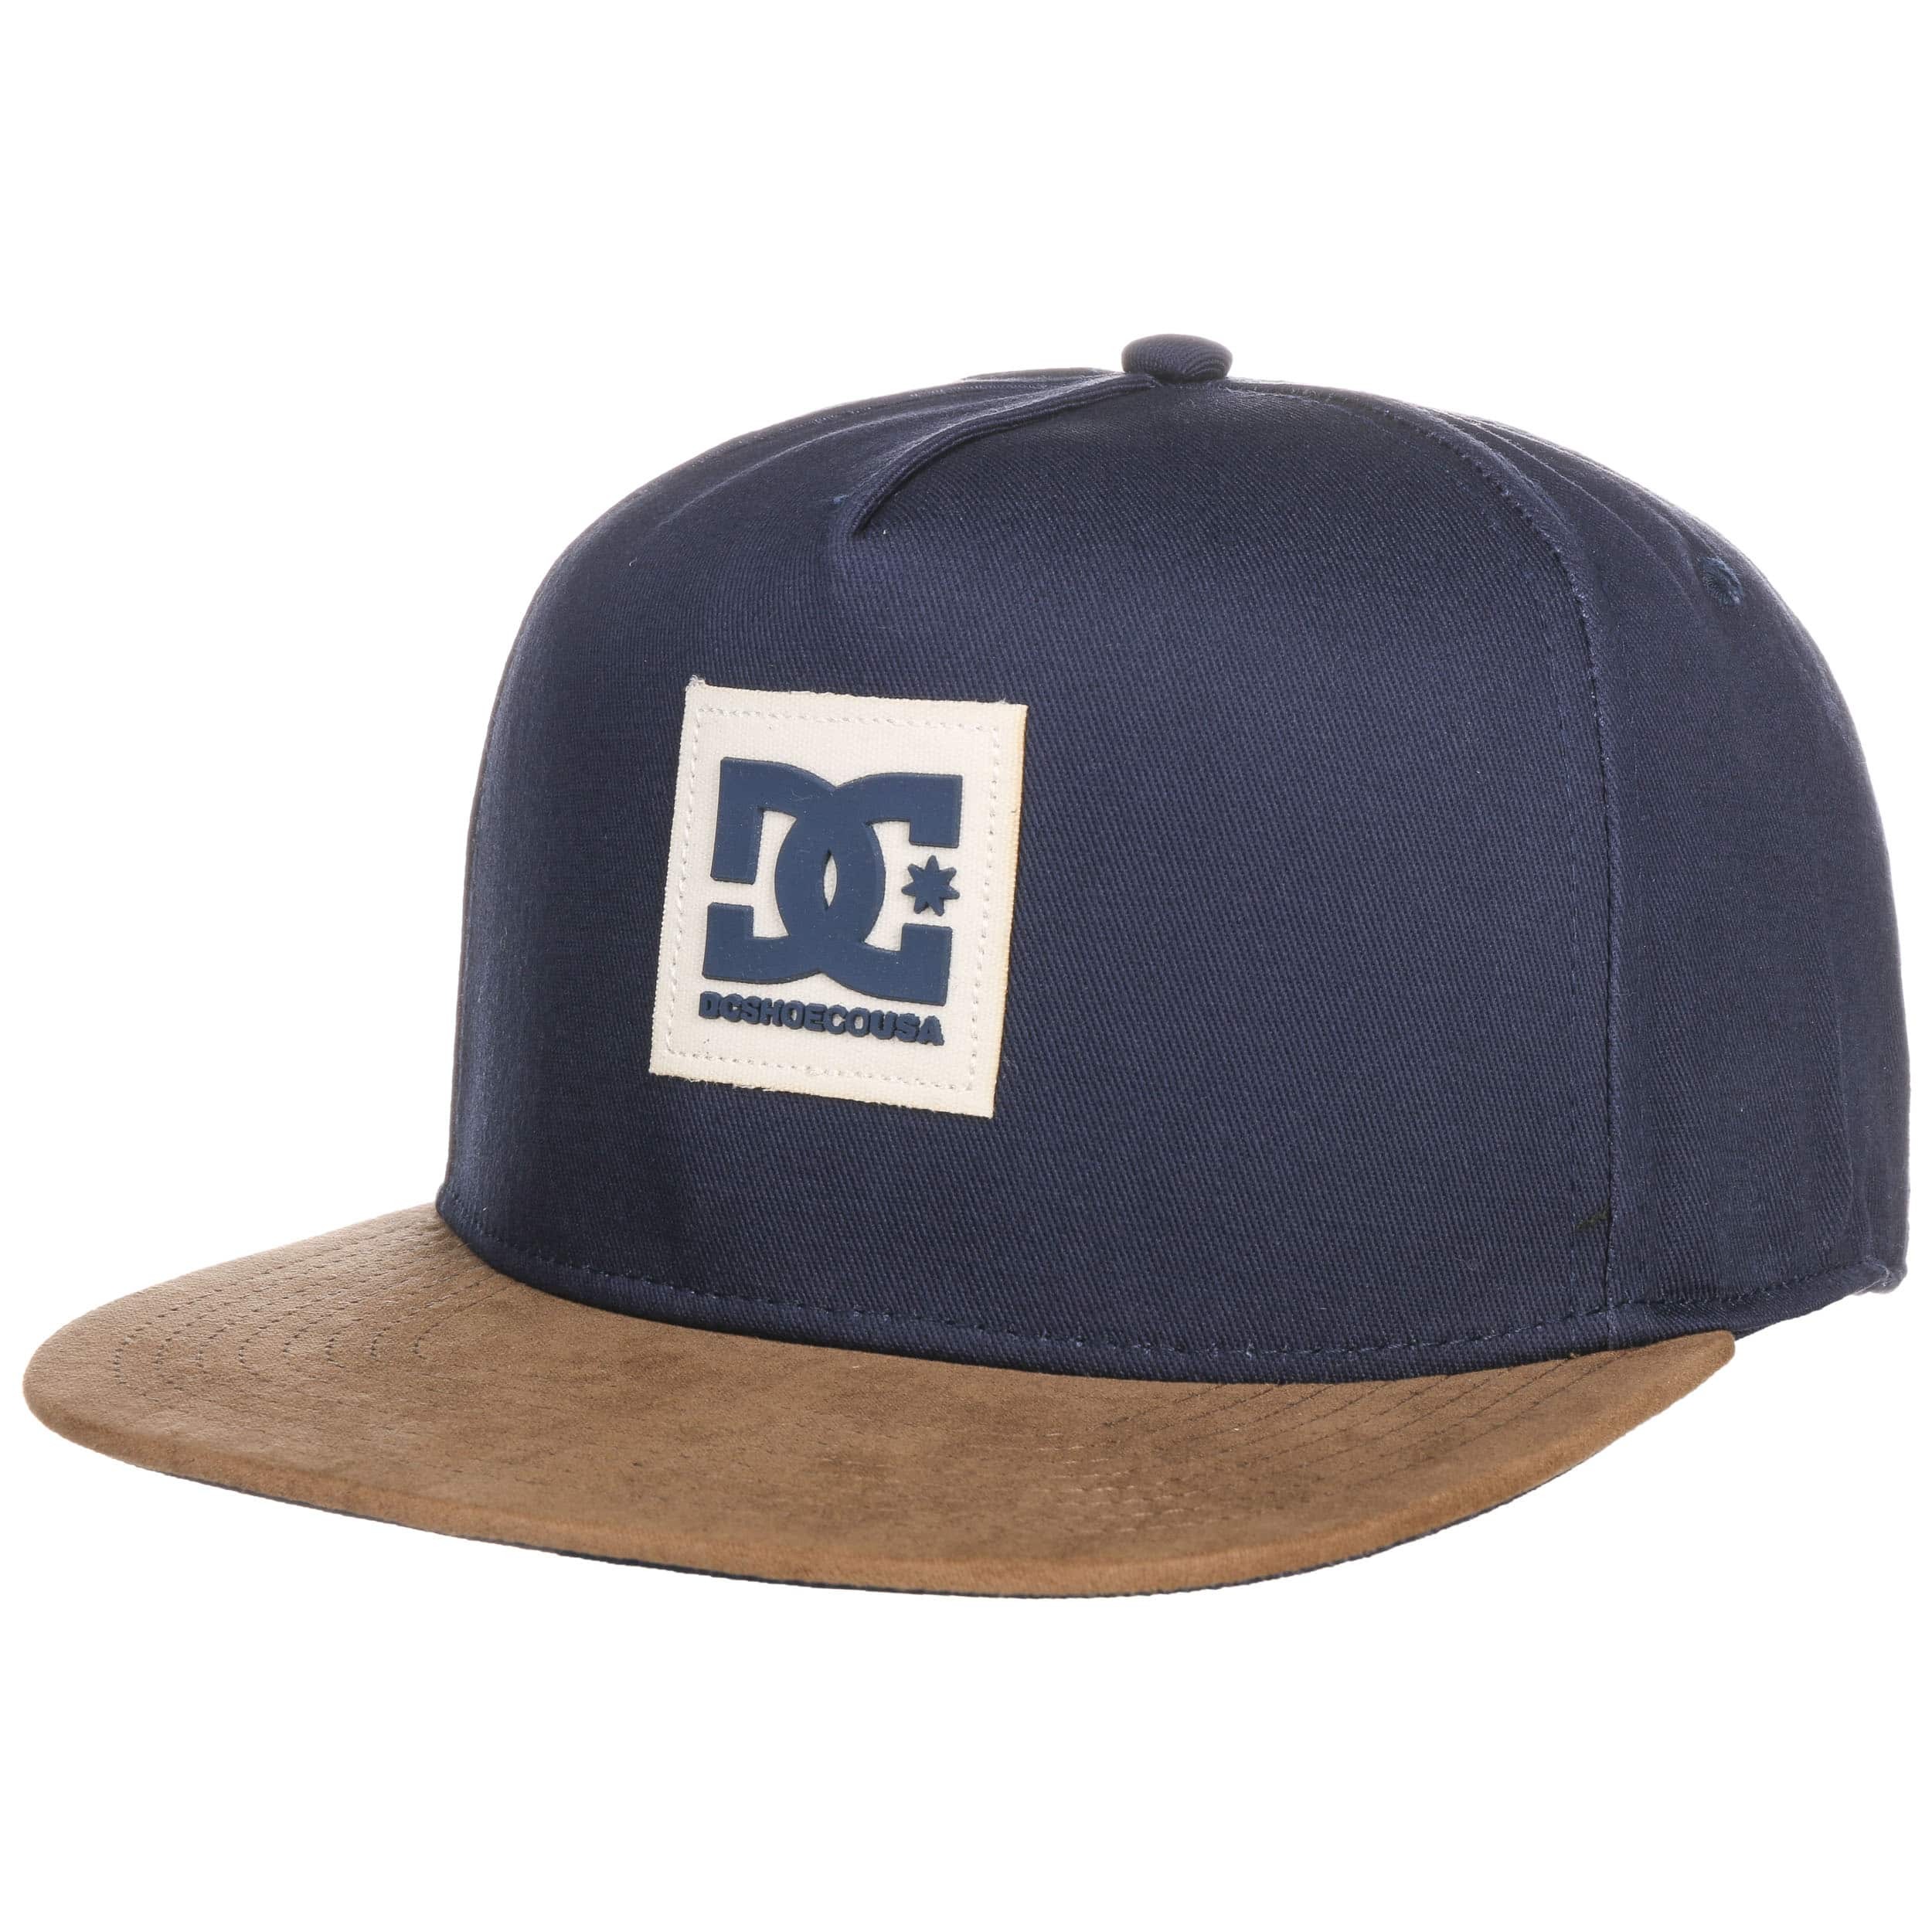 Dacks Snapback Cap by DC Shoes Co - 39,95 €